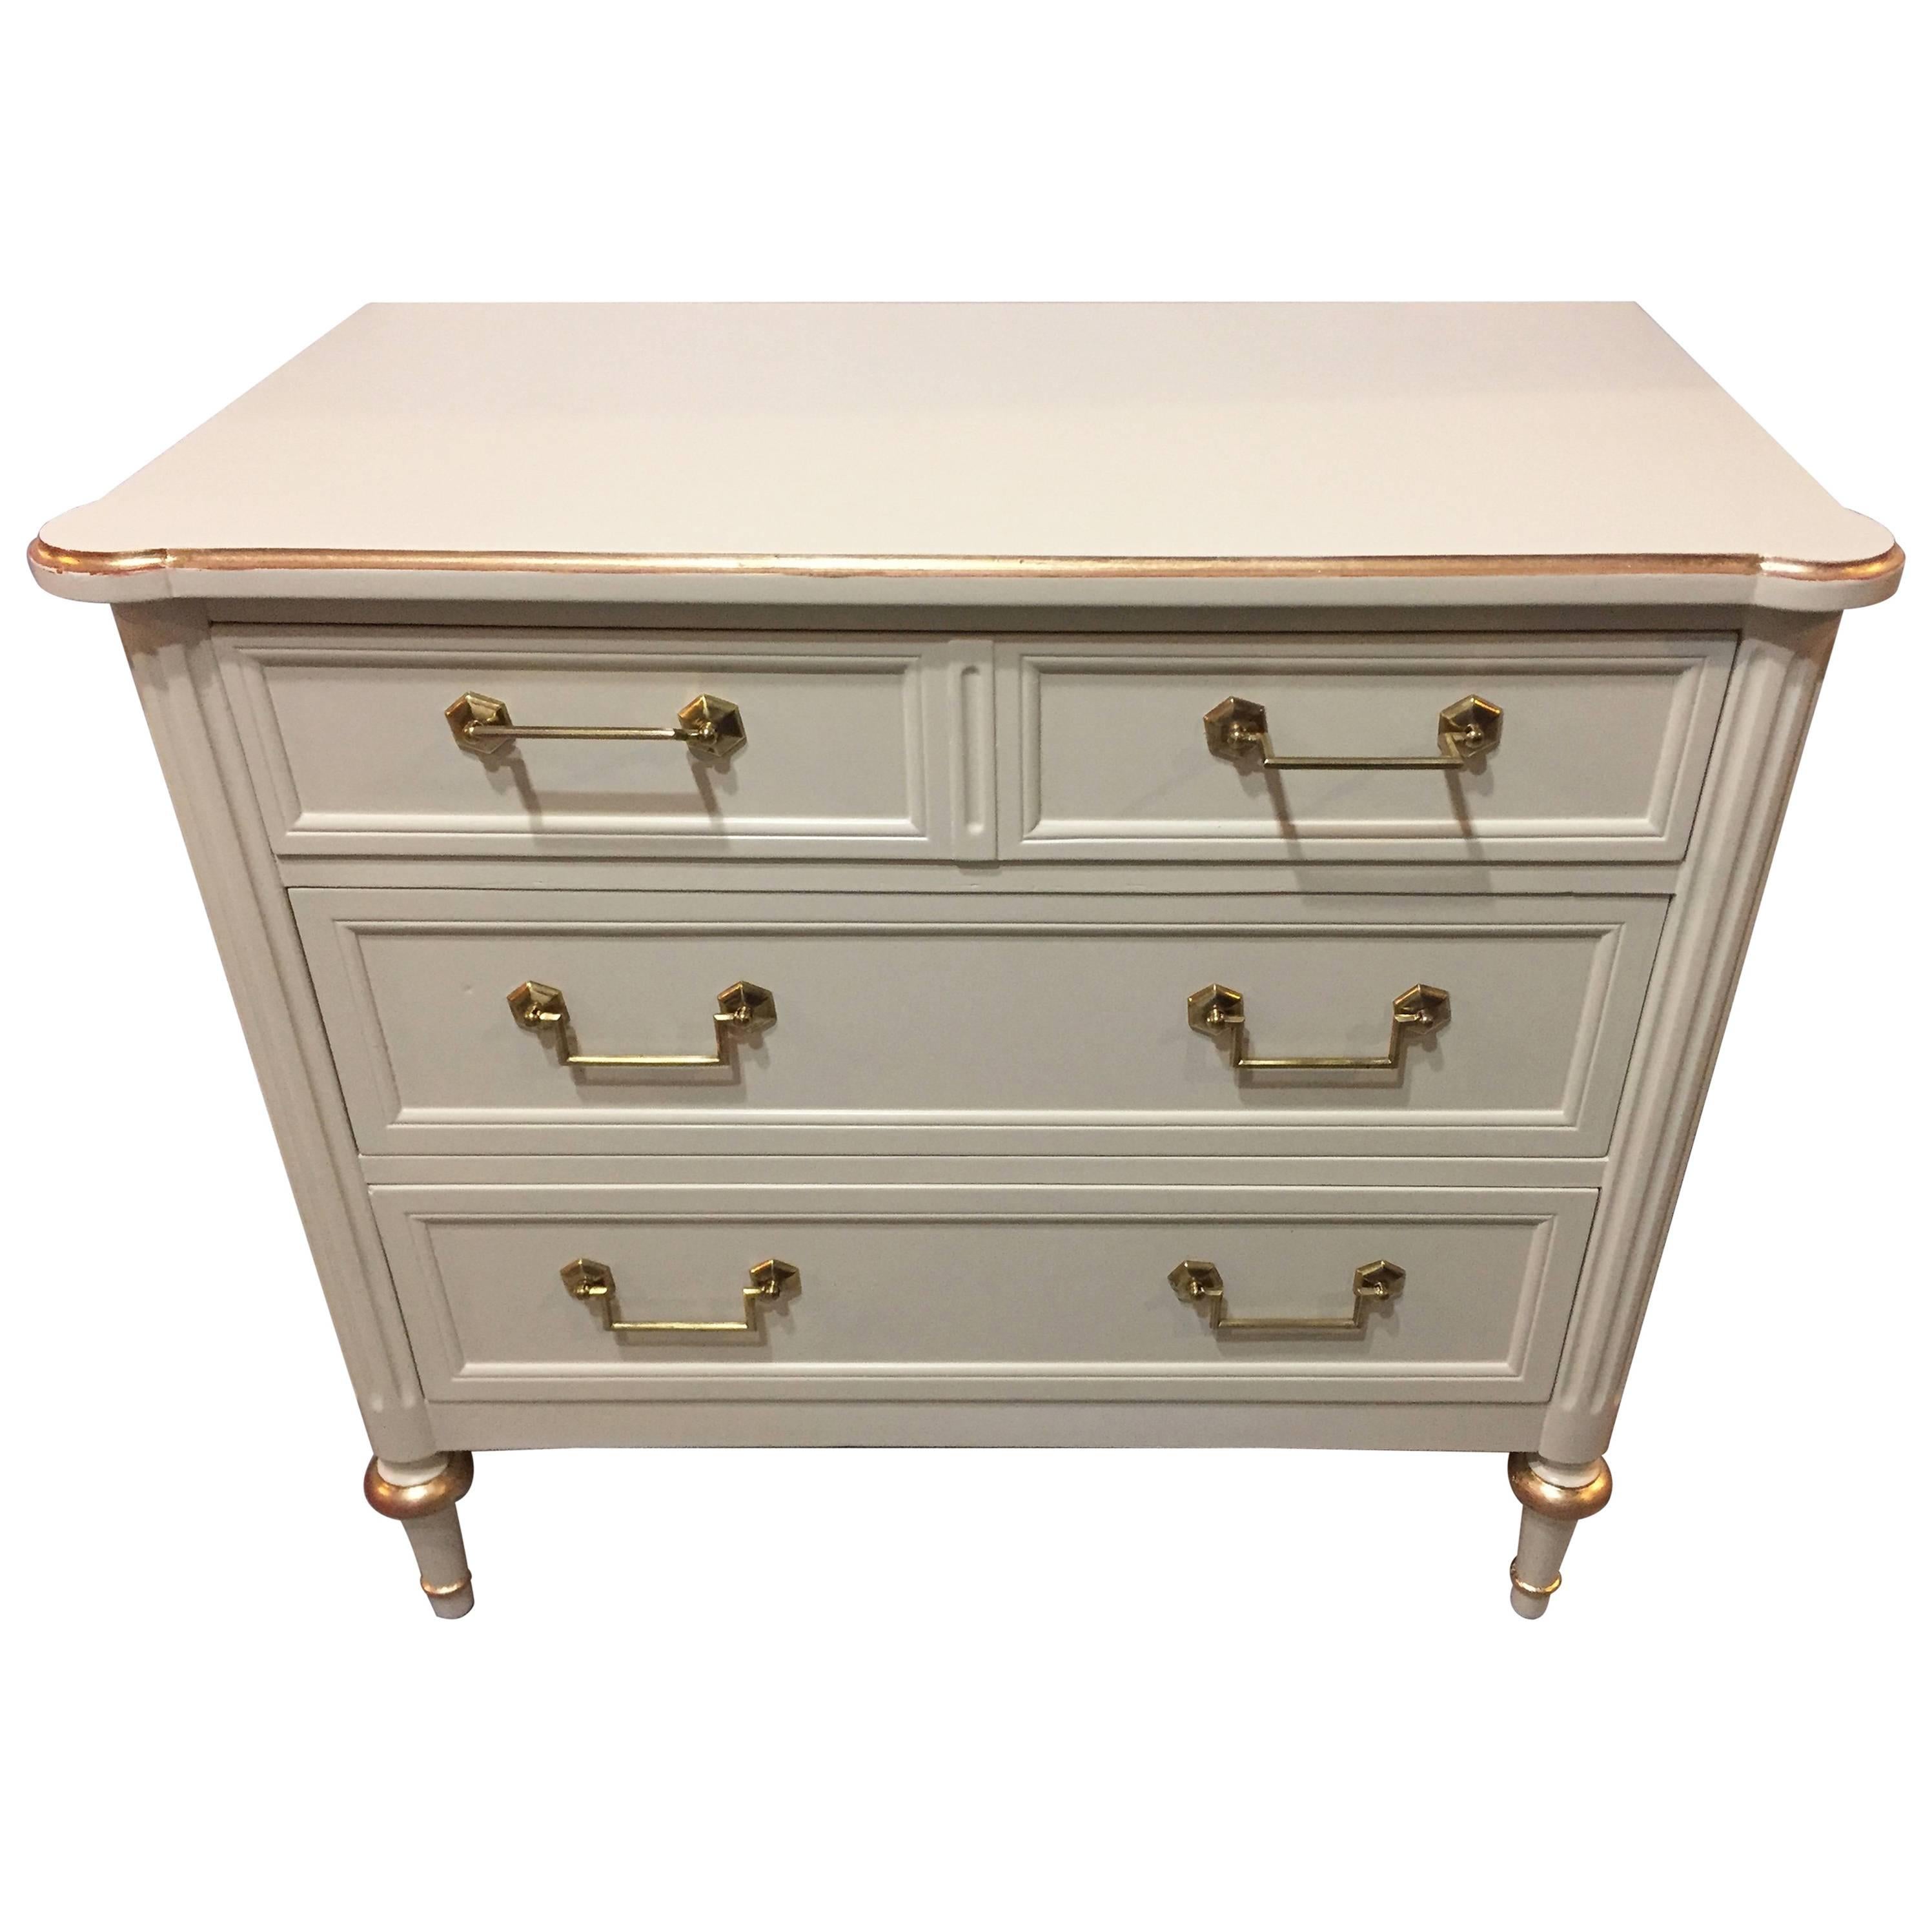 Parcel Paint and Gilt Decorated Commode Nightstand Manner of Jansen